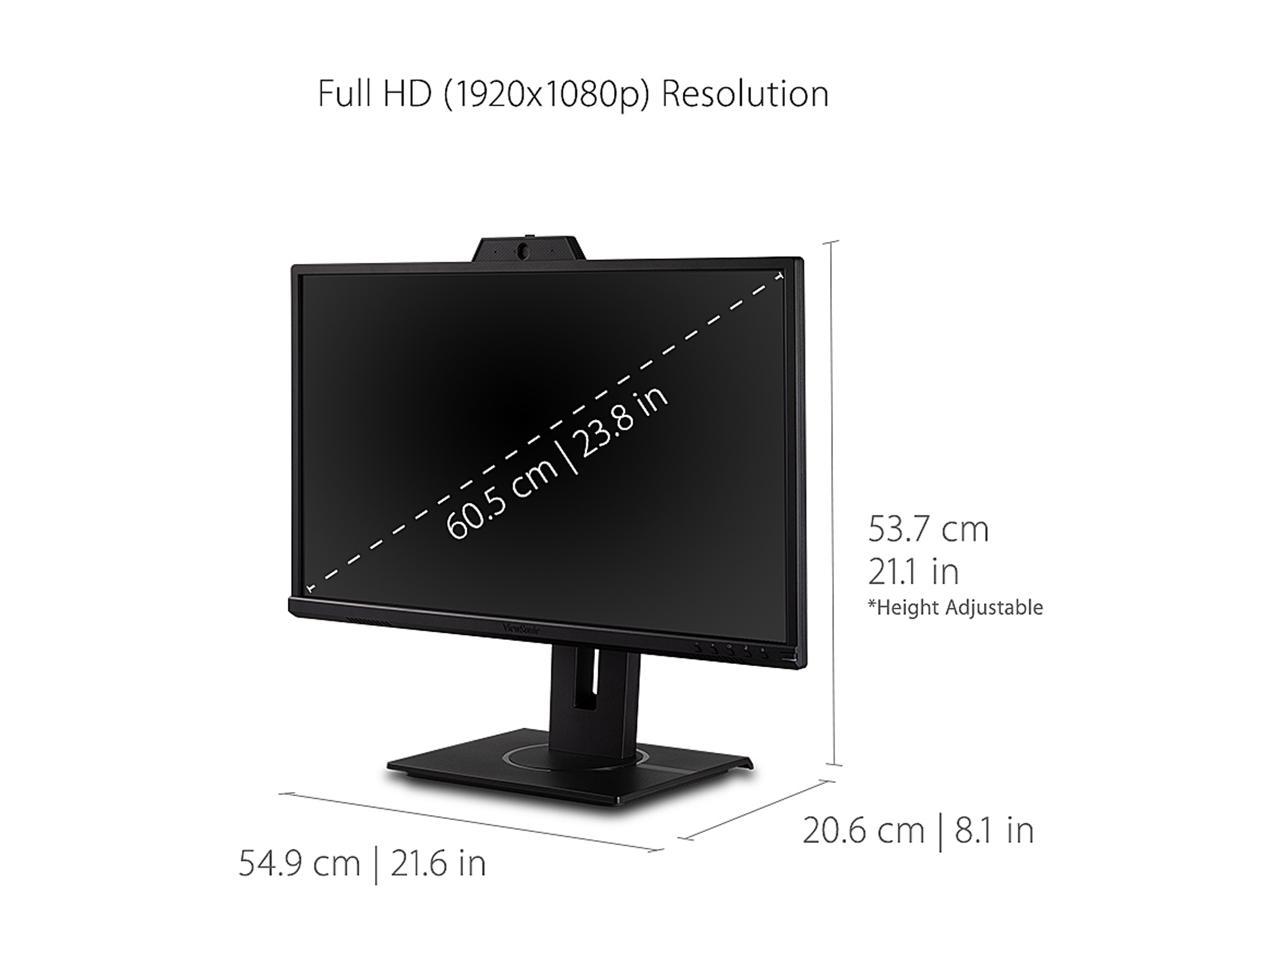 ViewSonic VG2440V 24 Inch 1080p IPS Video Conferencing Monitor with Integrated 2MP Camera, Microphone, Speakers, Eye Care, Ergonomic Design, HDMI DisplayPort VGA Inputs for Home and Office